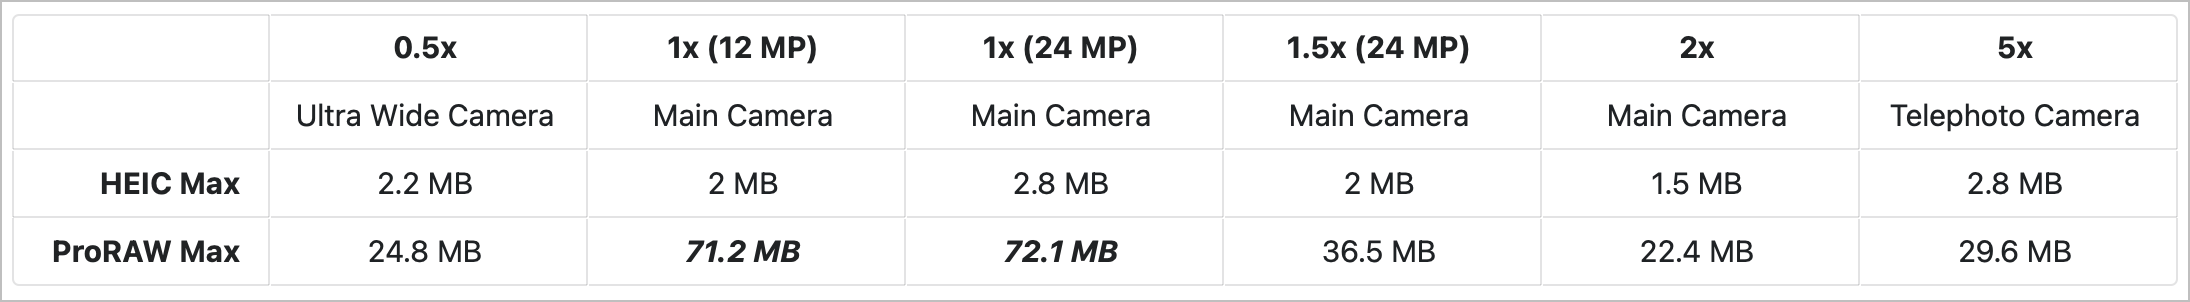 I am trying to figure out typical image sizes across different camera modes.